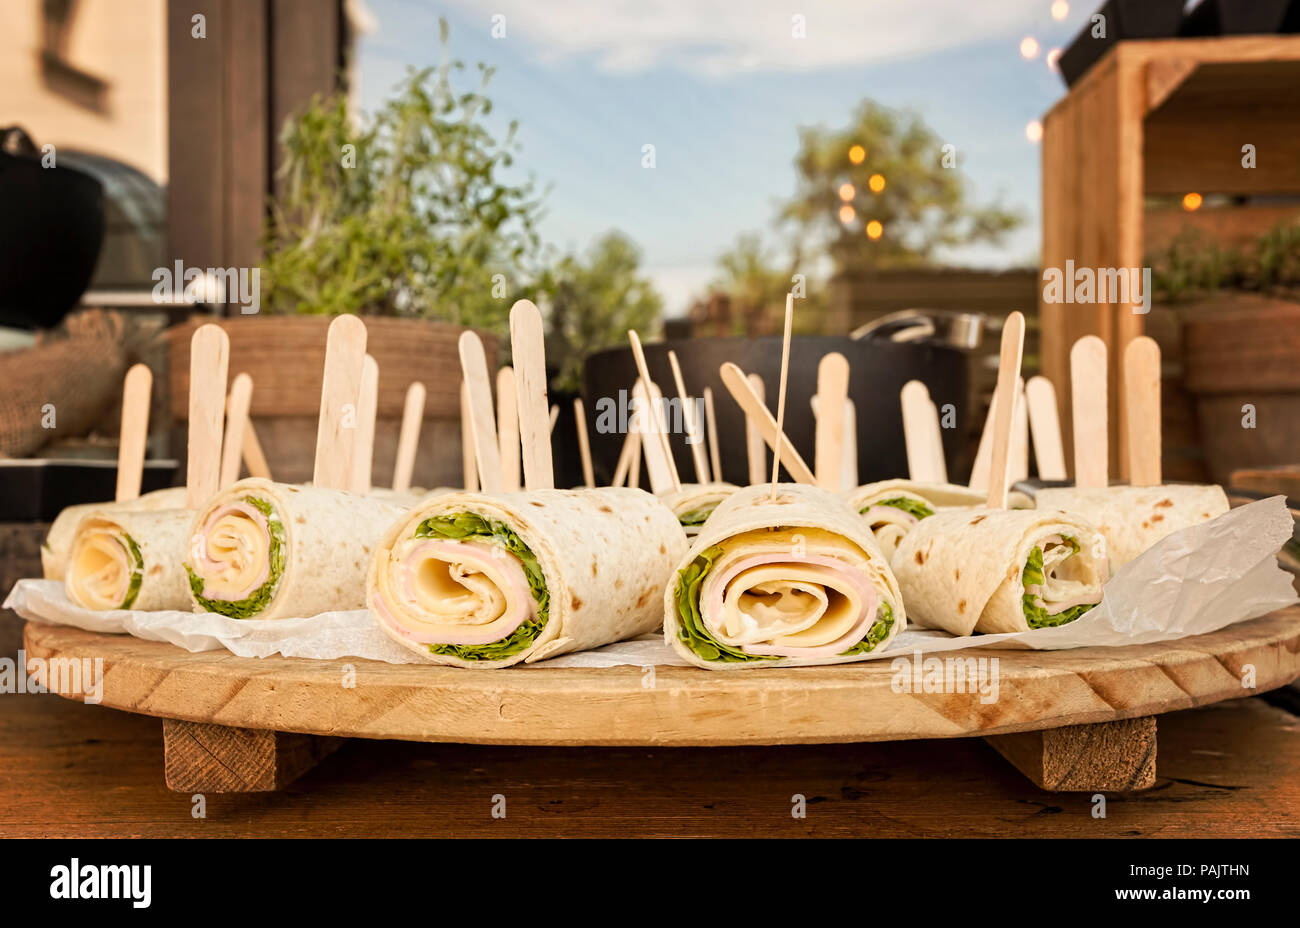 healthy turkey wrap sandwiches with lettuce, ham, cheese and cream servde in restaurant on a wooden board Stock Photo